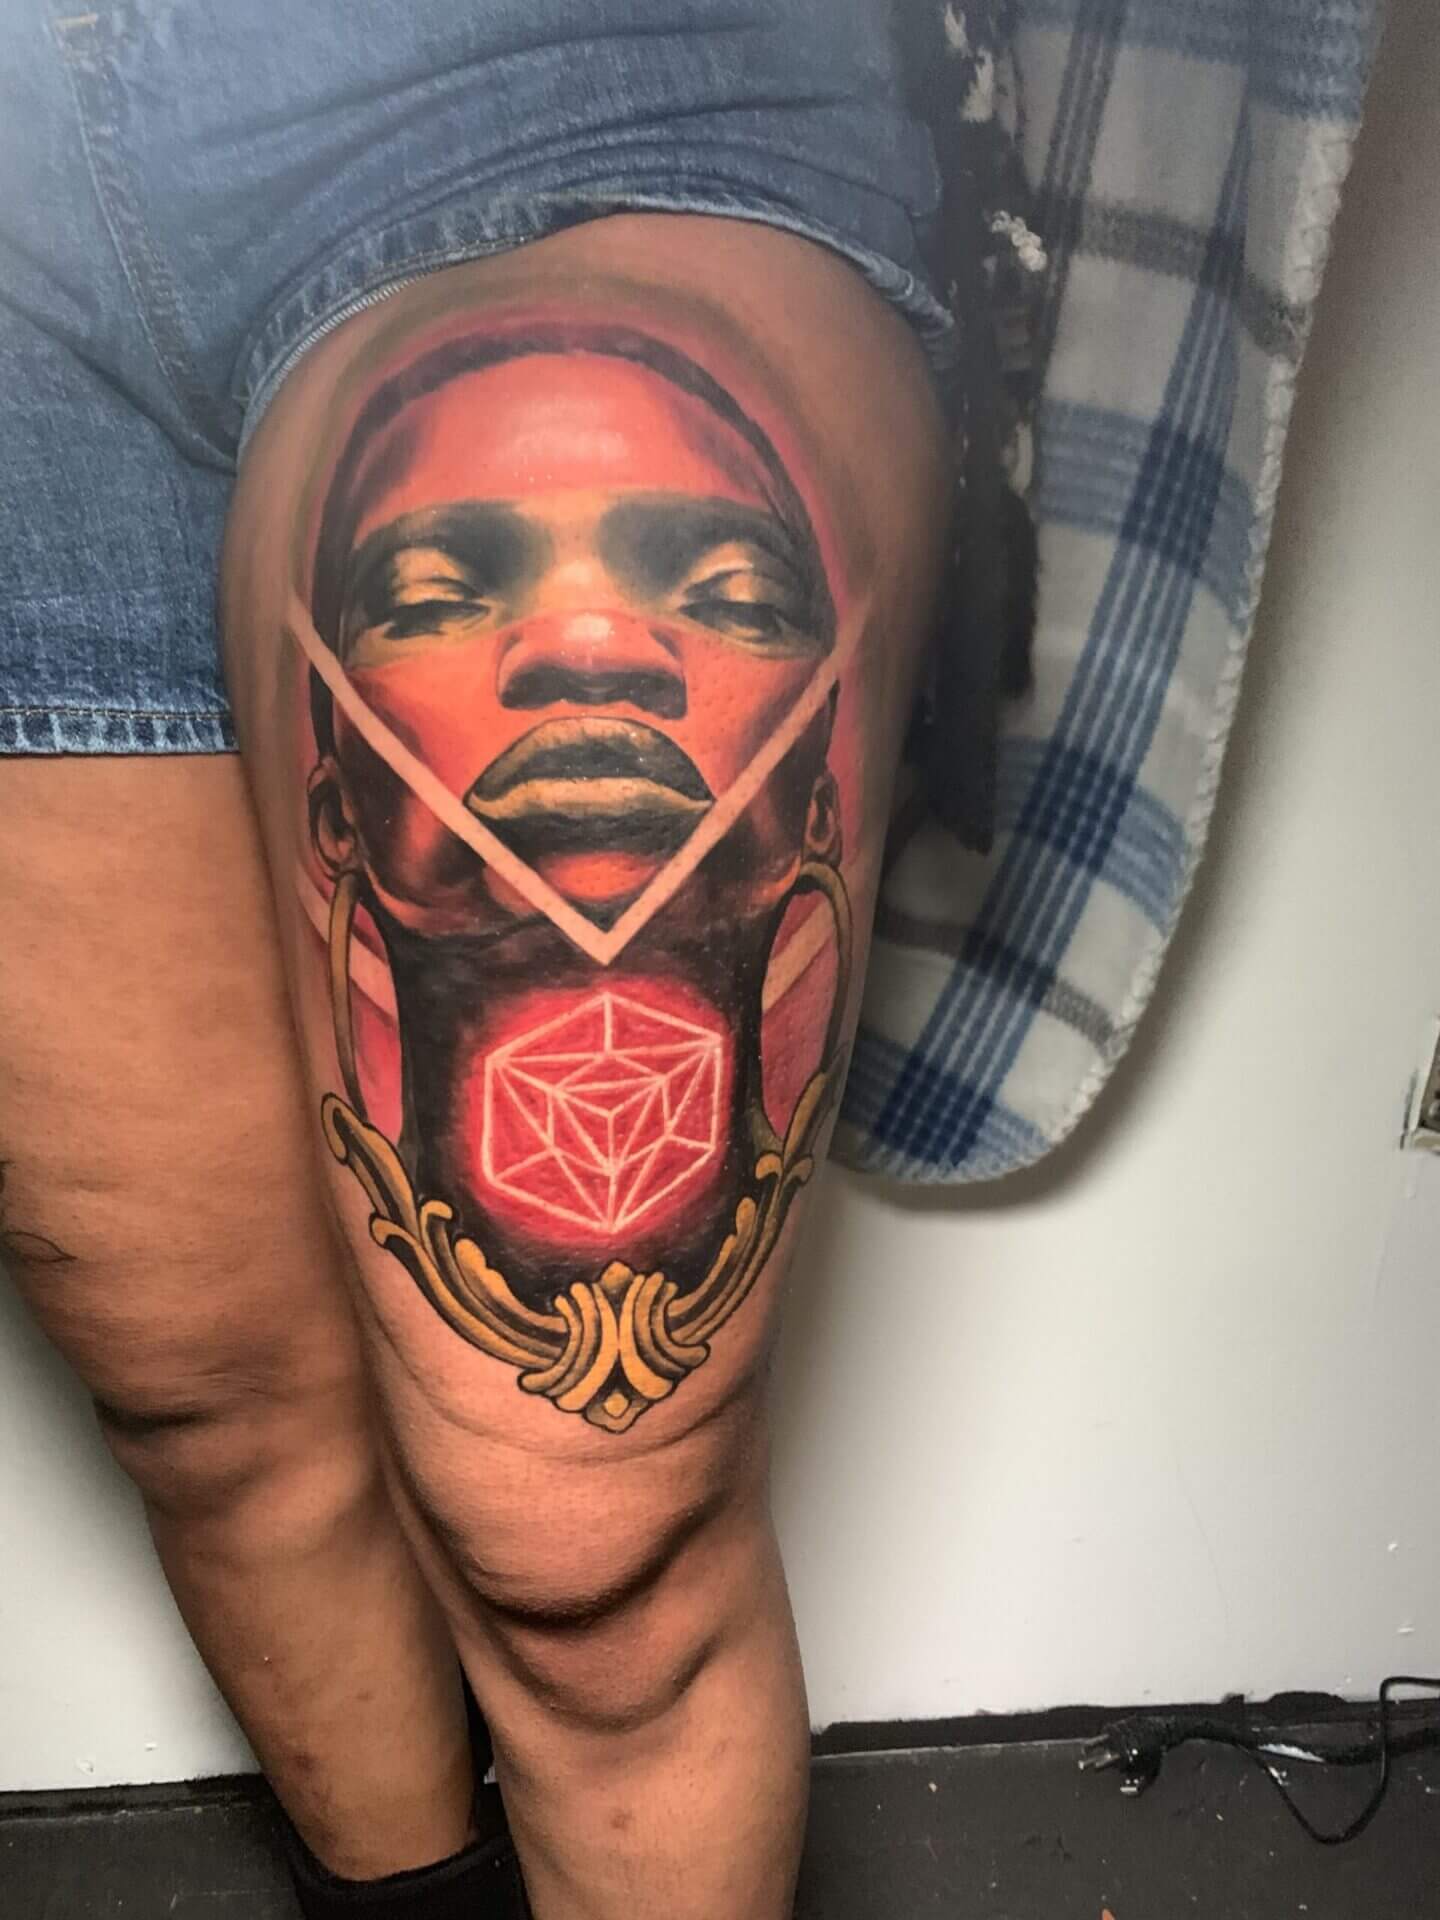 Cover-Up tattoo by tattoo artist JR Outlaw at Iron Palm Tattoos & Body Piercing in Atlanta, GA. We're open late night til 2AM. Call 404-973-7828 or stop by for a free consultation. Walk-Ins are welcome.